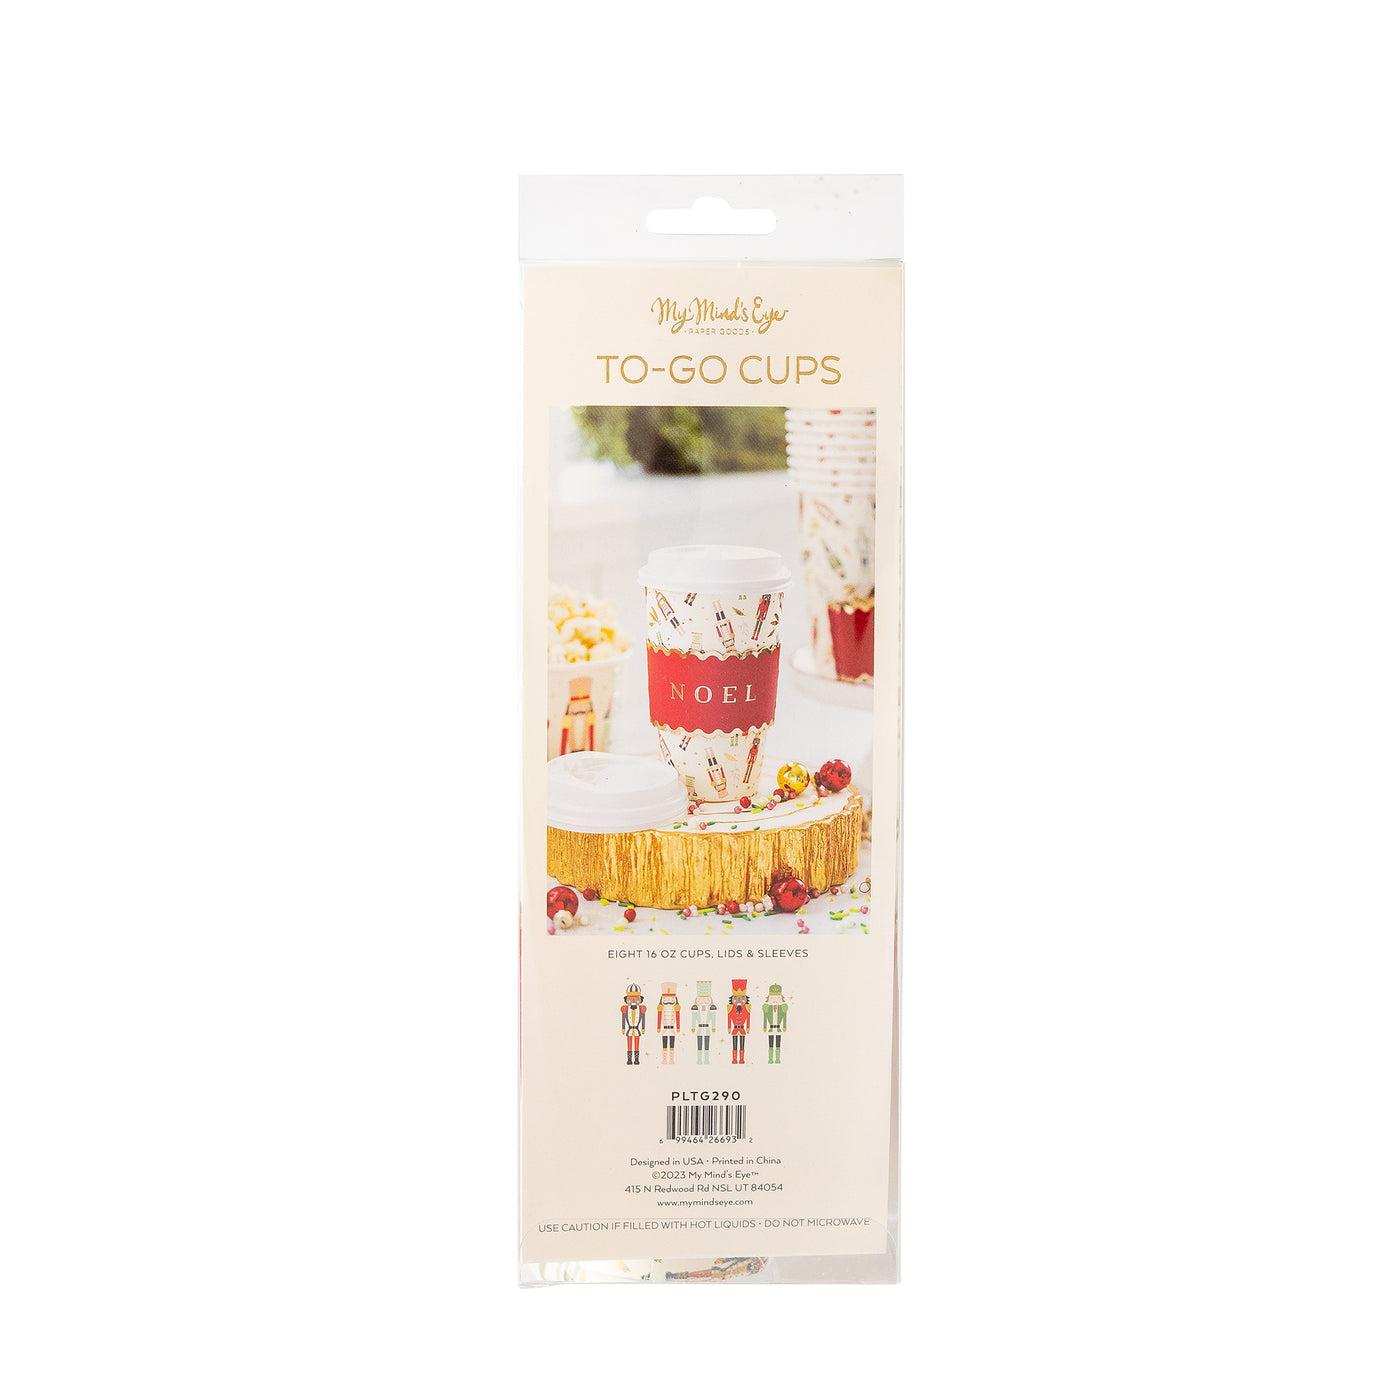 PLTG290 - Nutcrackers To-Go Cups 8 ct